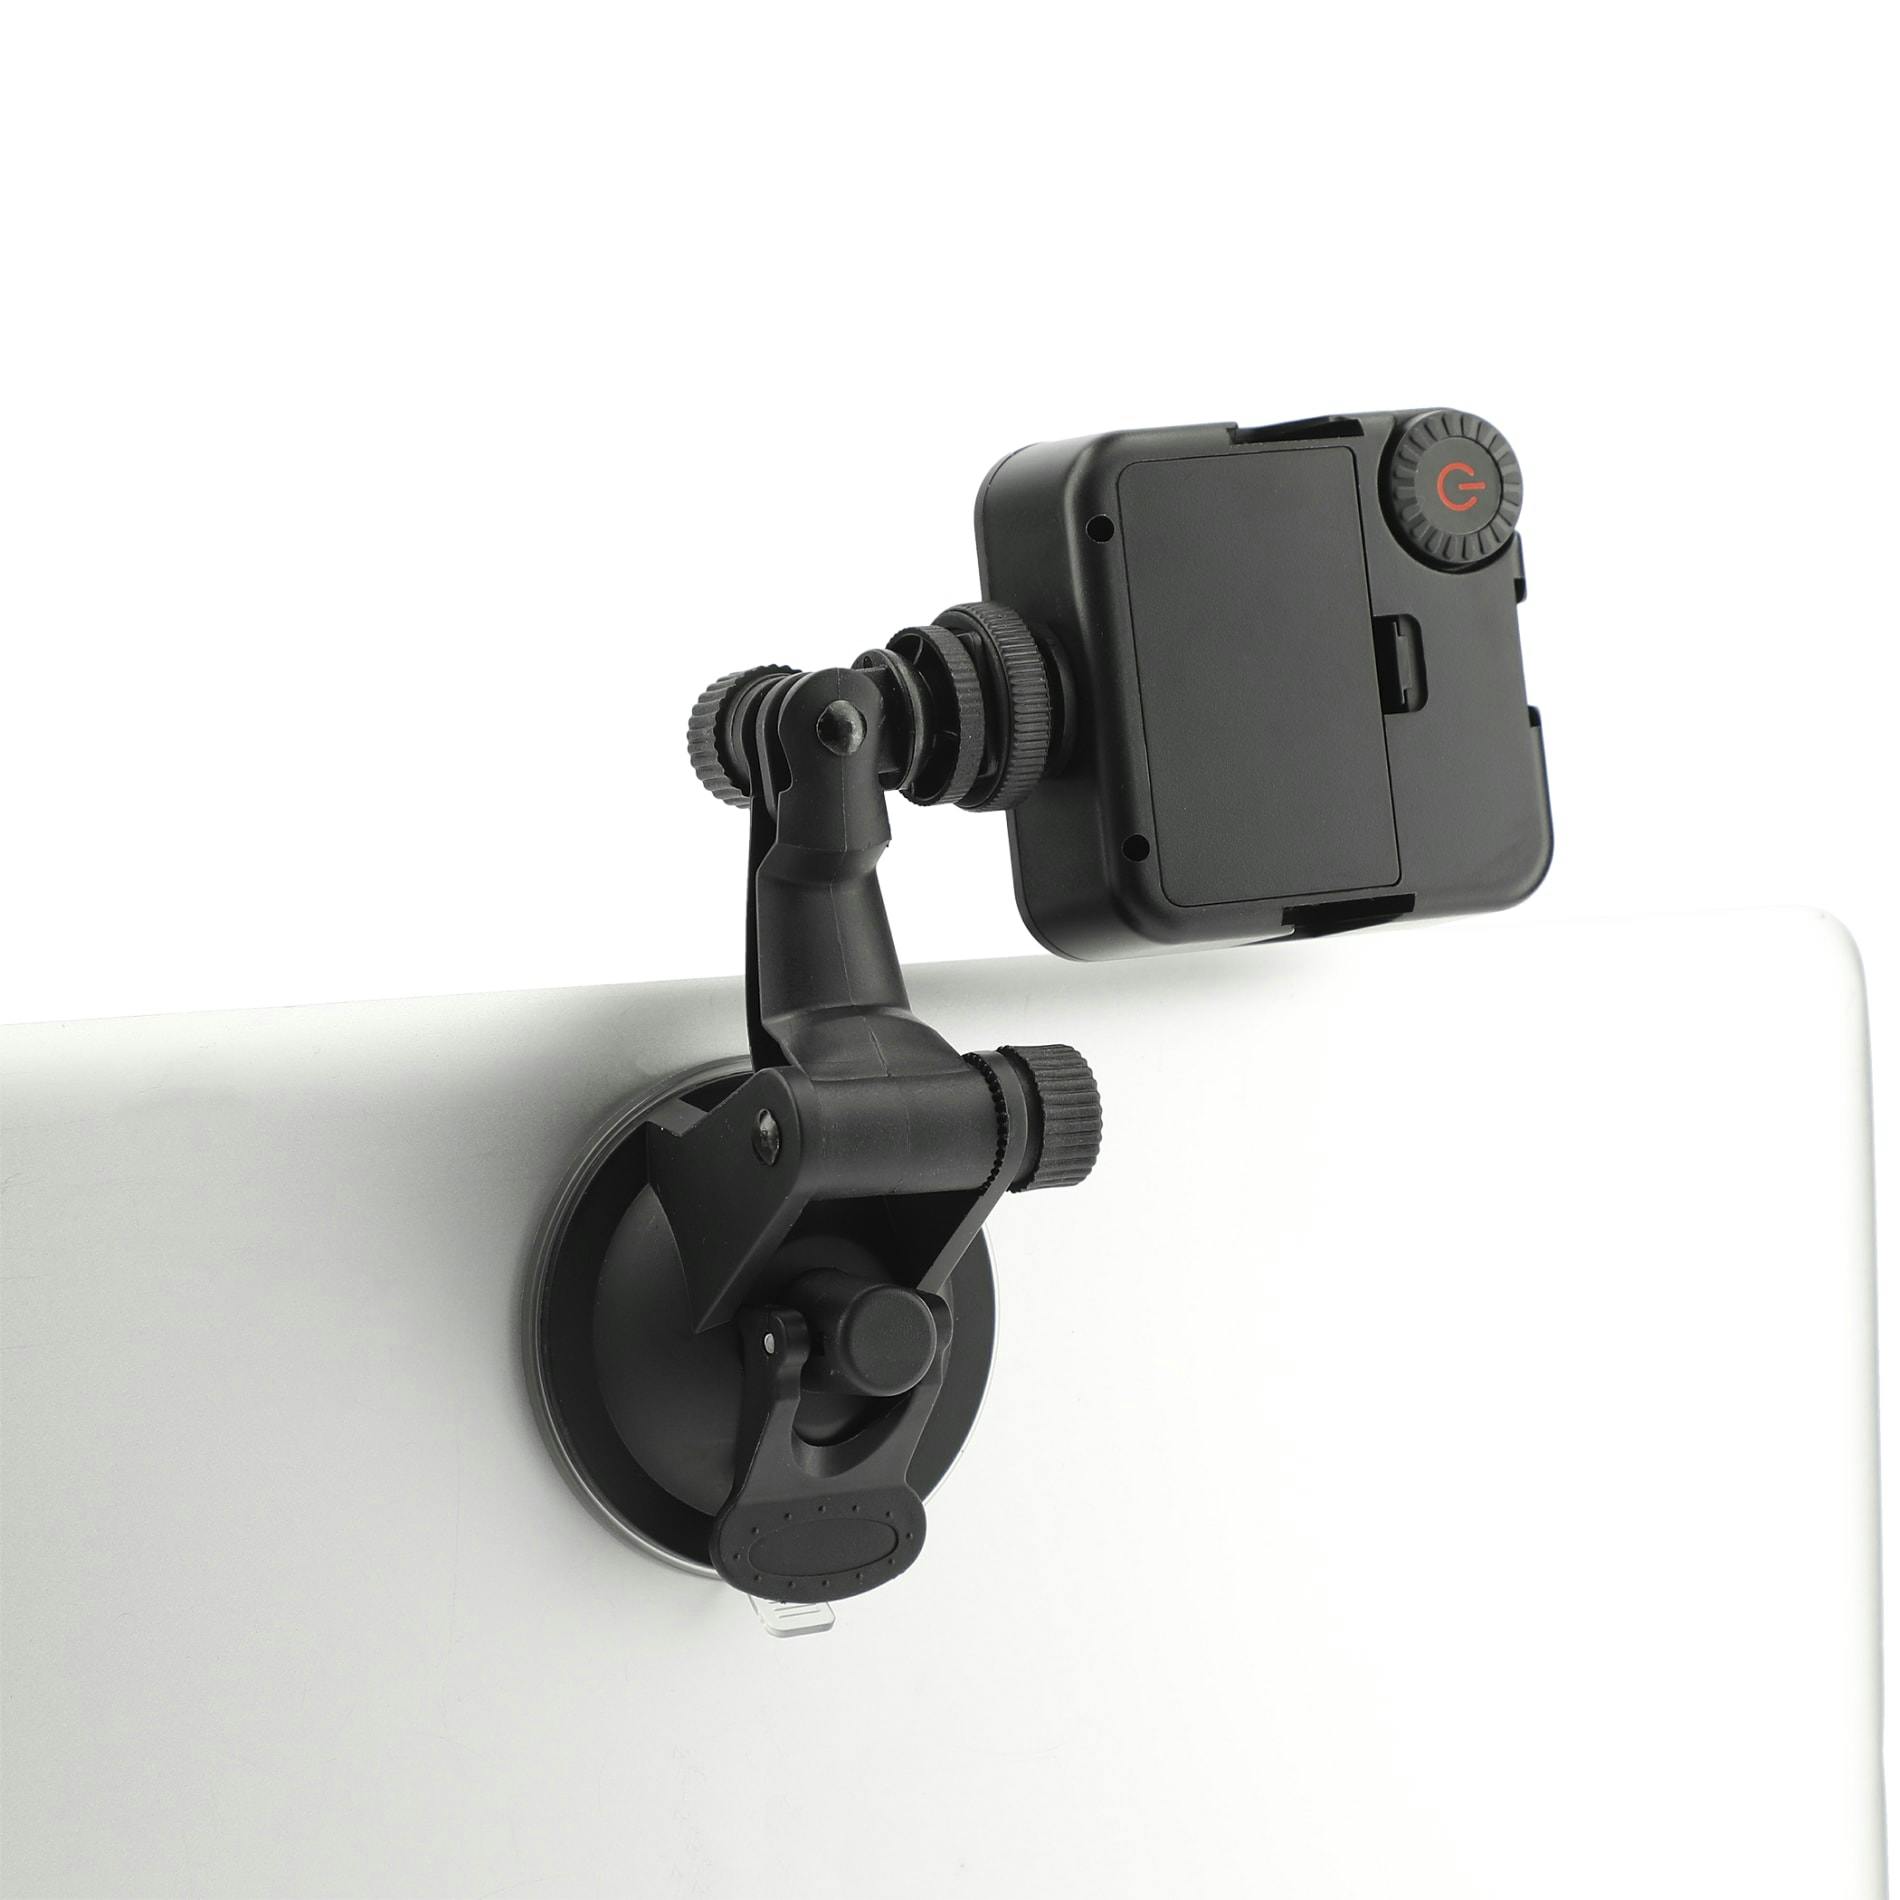 Laptop & Tablet Portable Video Light - additional Image 1